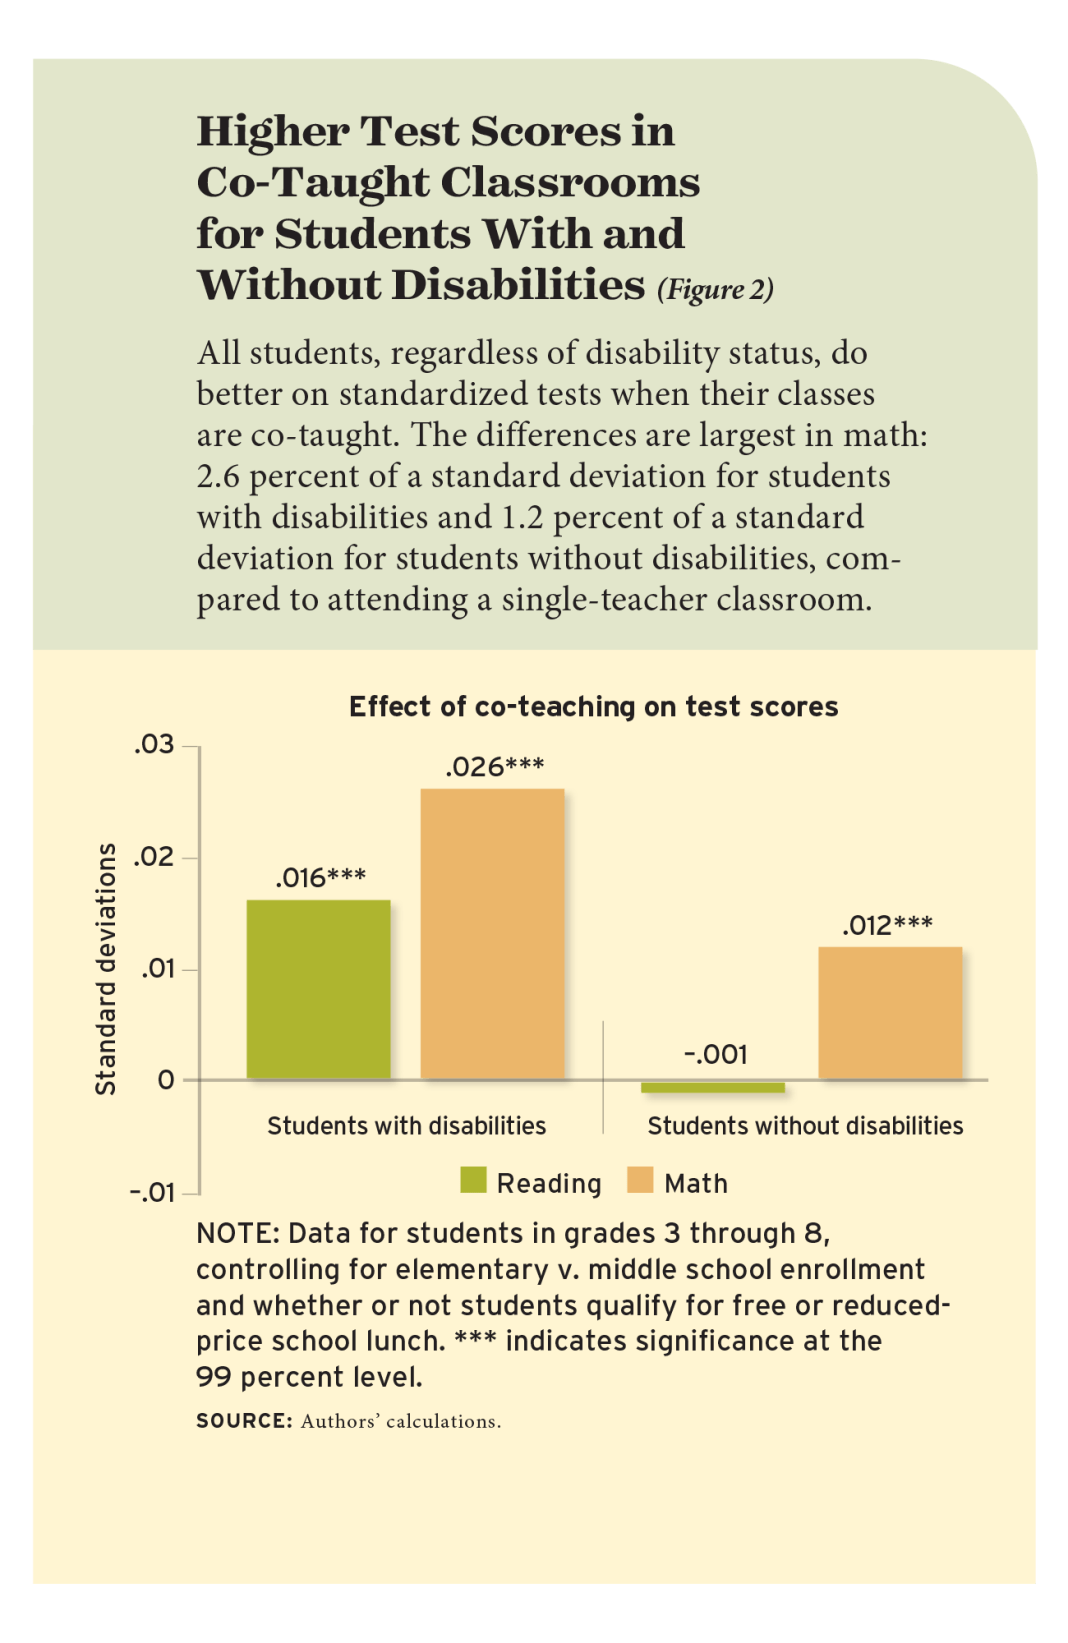 Higher Test Scores in Co-Taught Classrooms for Students With and Without Disabilities (Figure 2)